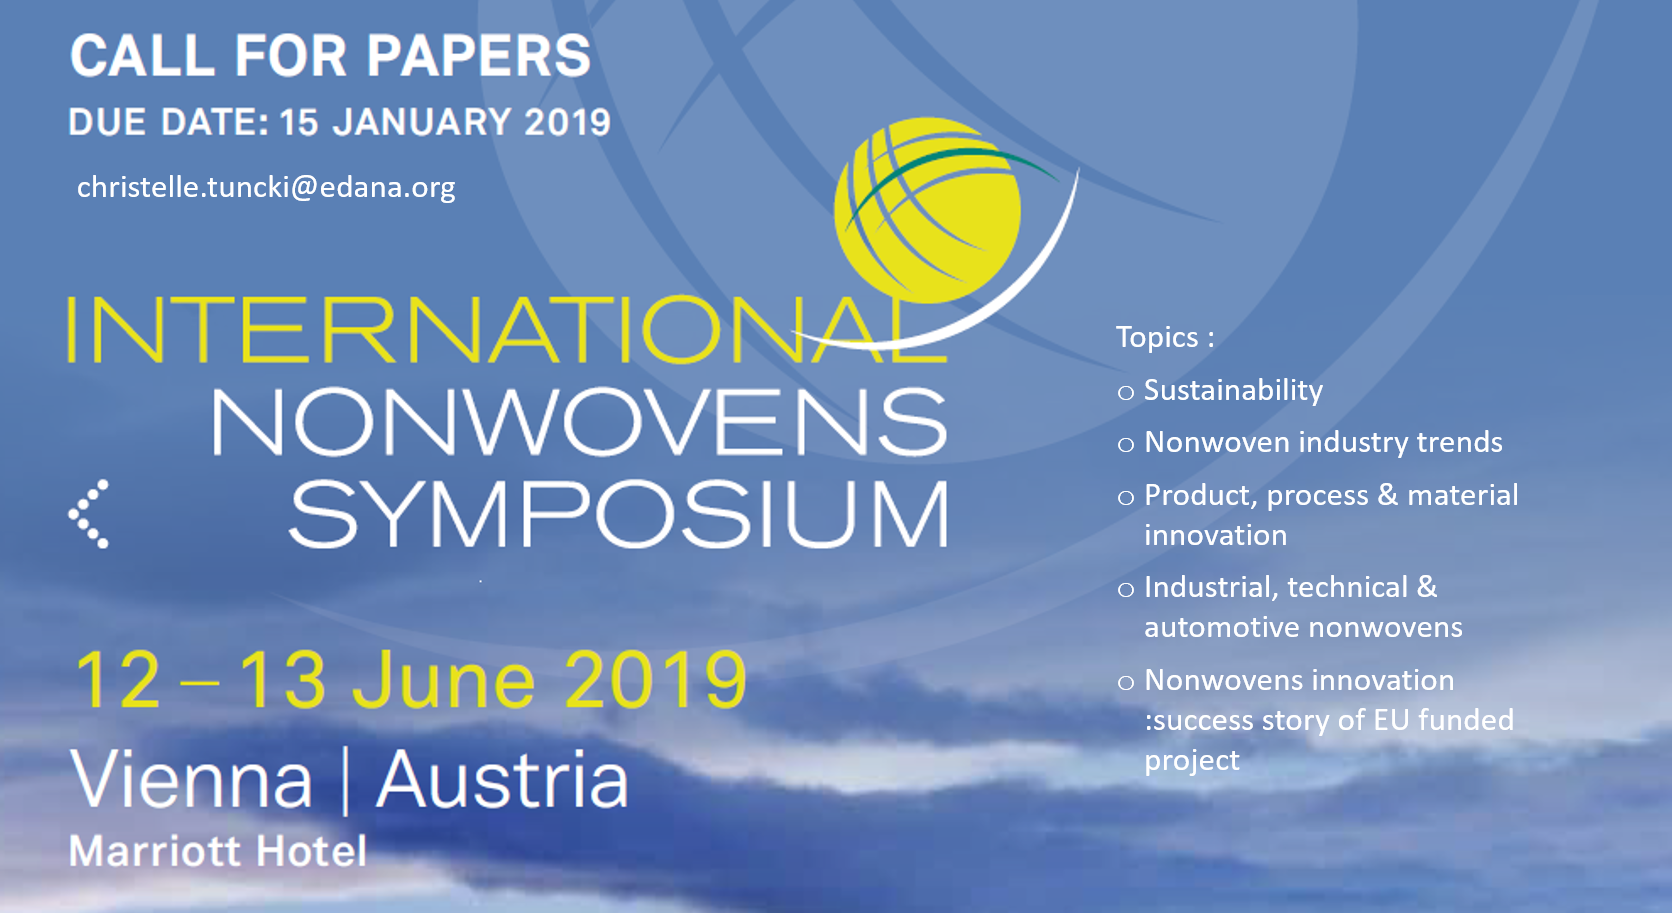 The focus of the symposium will be sustainability in the nonwovens sector.